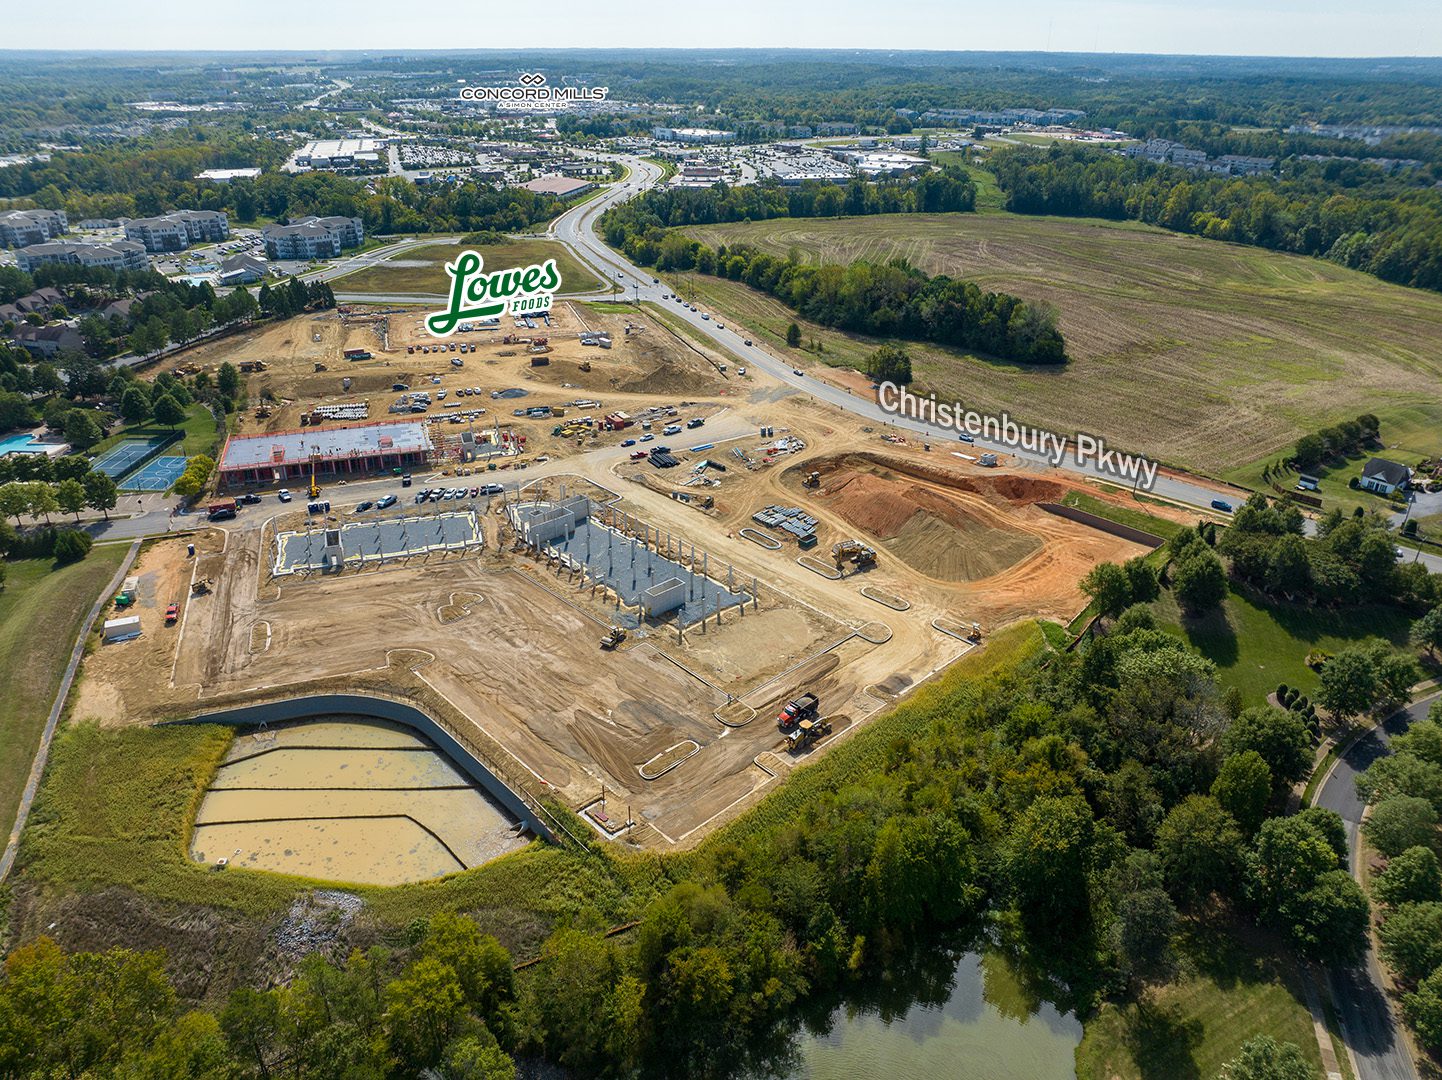 aerial image of construction at Christenbury Village with Concord Mills in the background